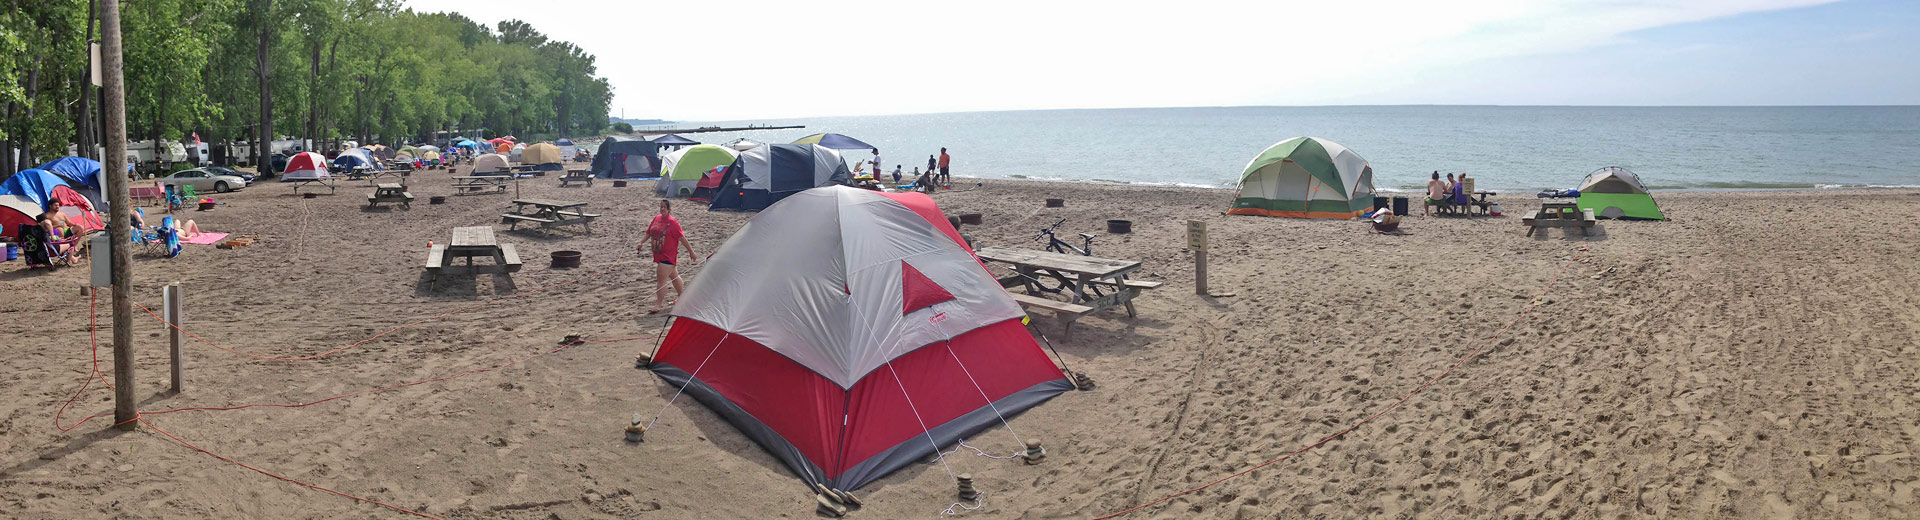 Camping on the beach at Sara’s Campground